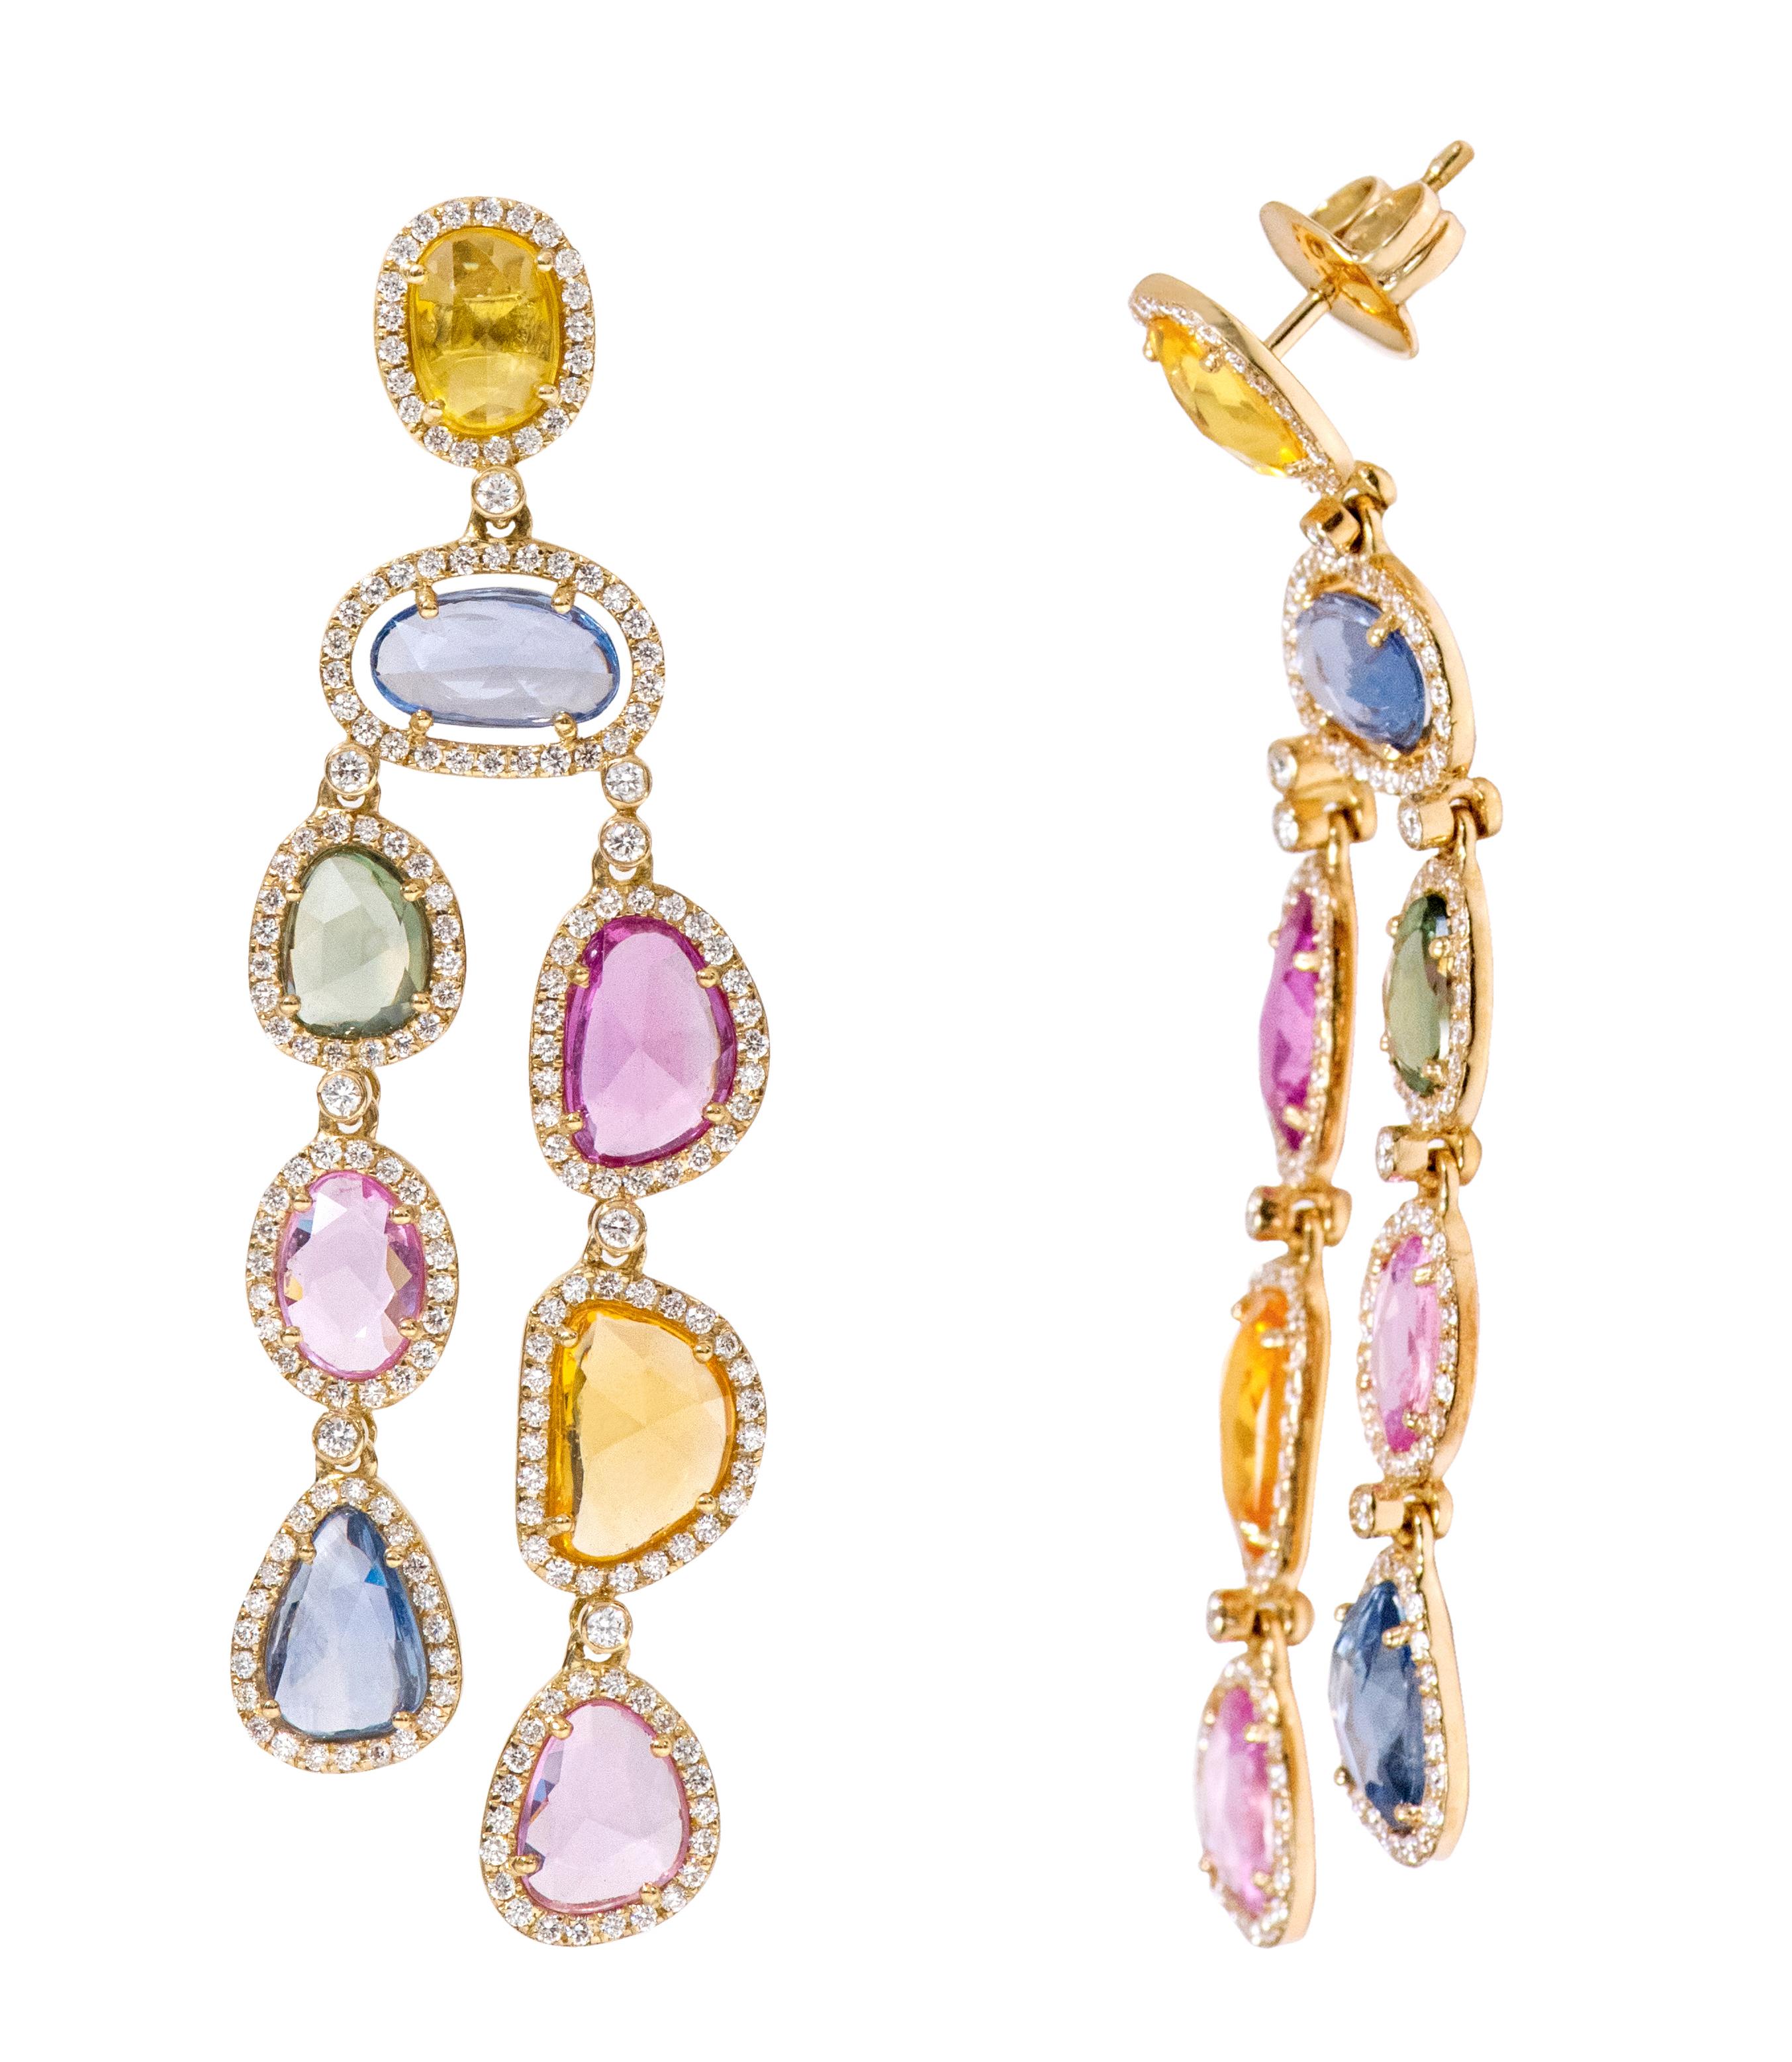 18 Karat Yellow Gold 17.91 Carat Multi-Color Sapphire and Diamond Drop Earrings 

This fascinating contemporary rainbow multi-sapphire and diamond cluster hanging earring is phenomenal. The earring is designed stylishly with uneven shape and mix